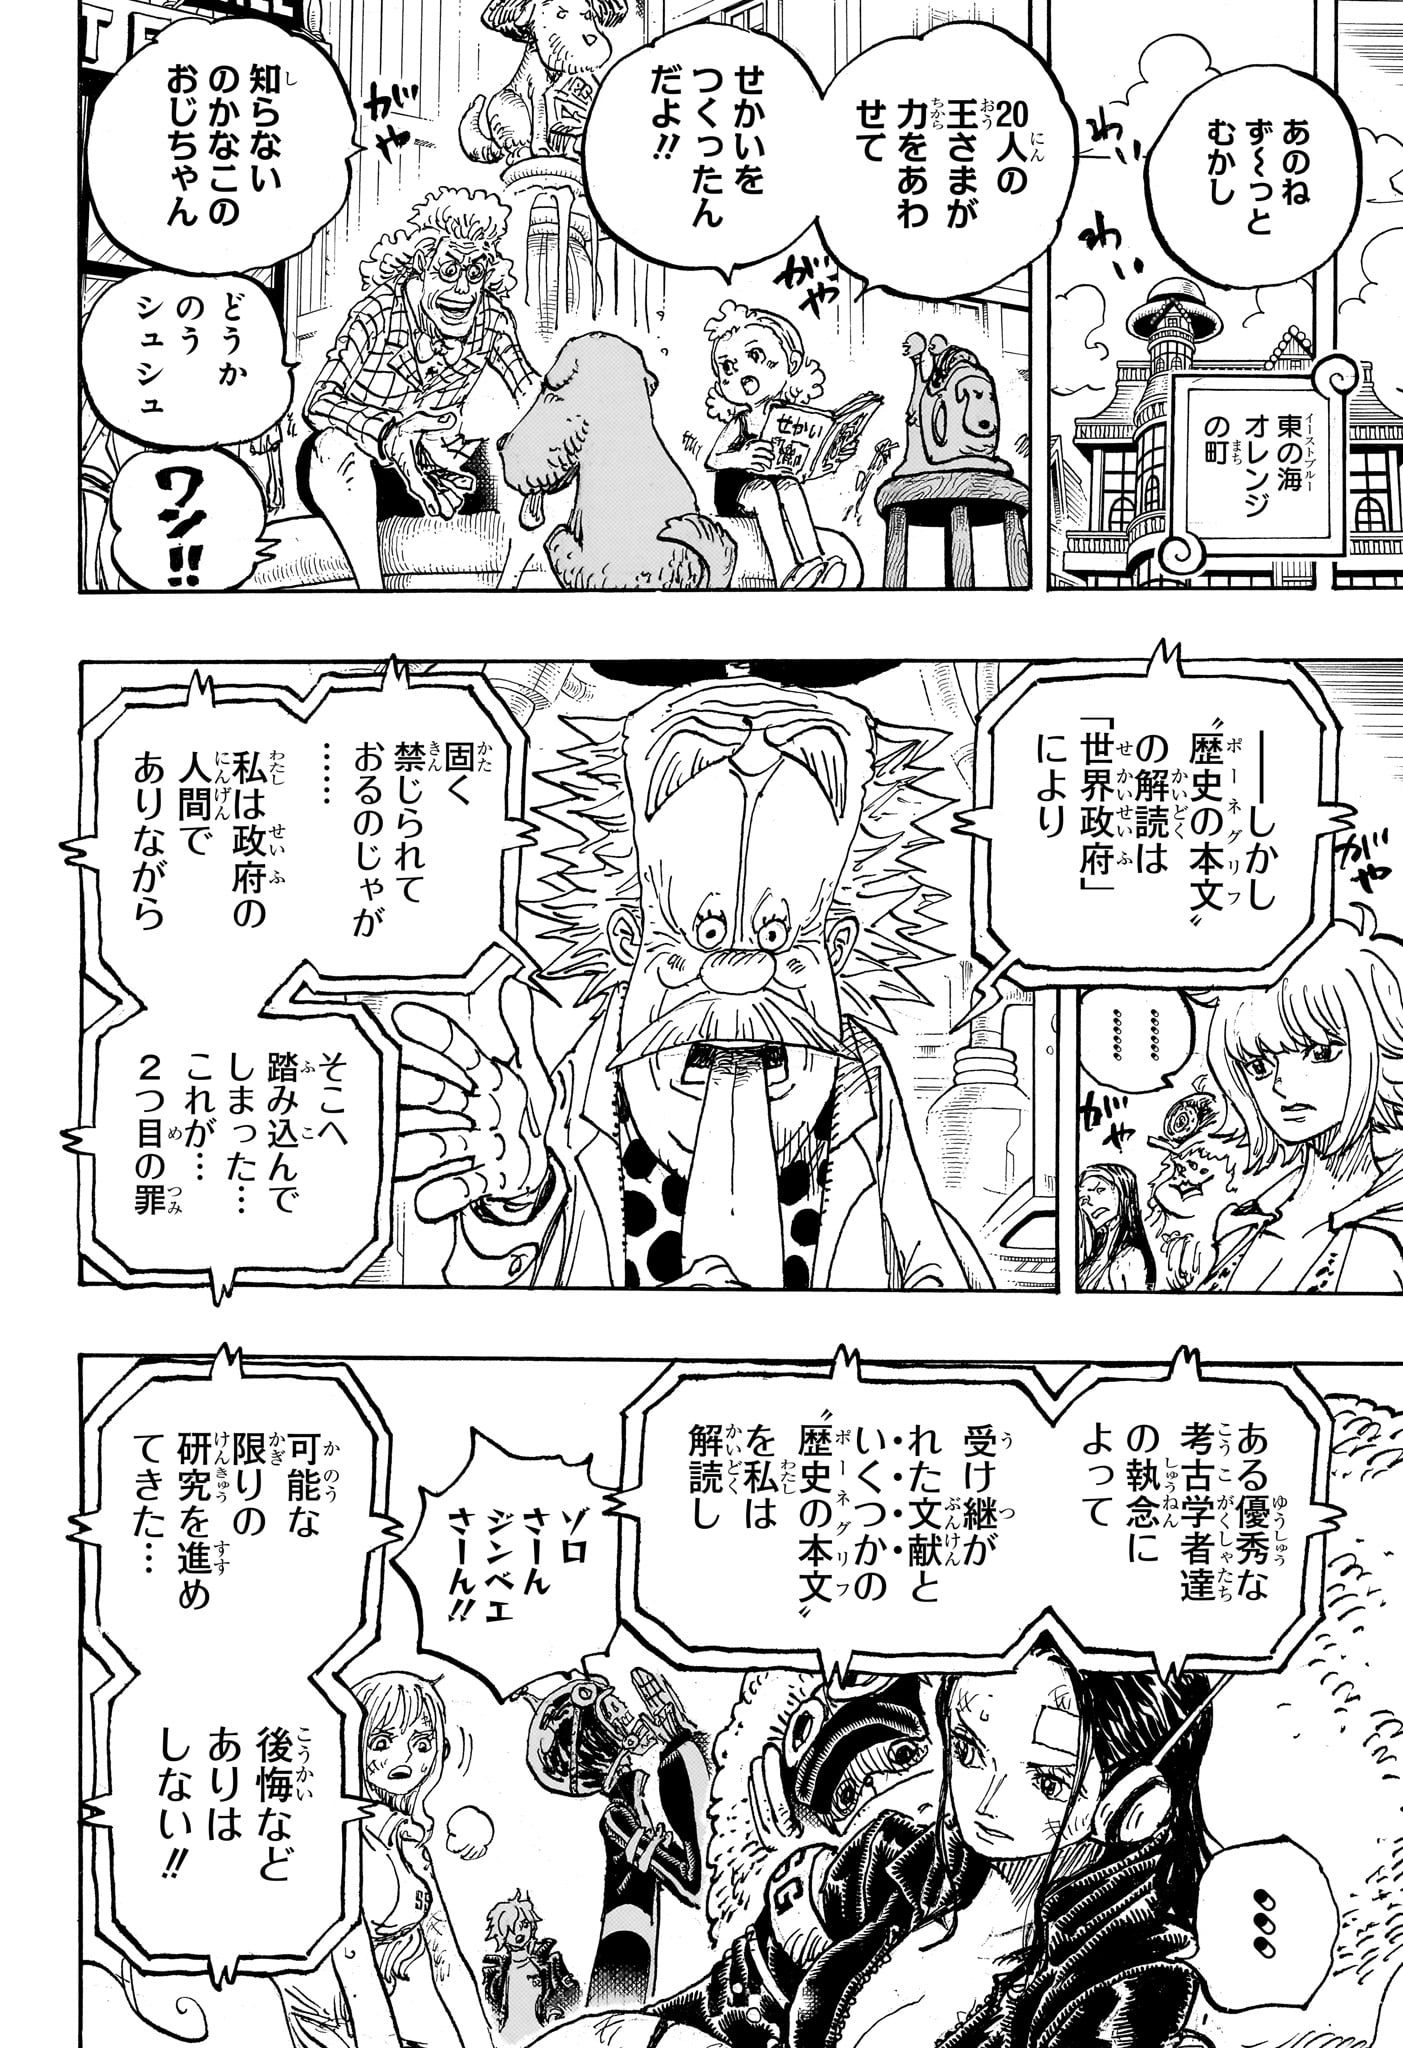 One Piece - Chapter 1114 - Page 12